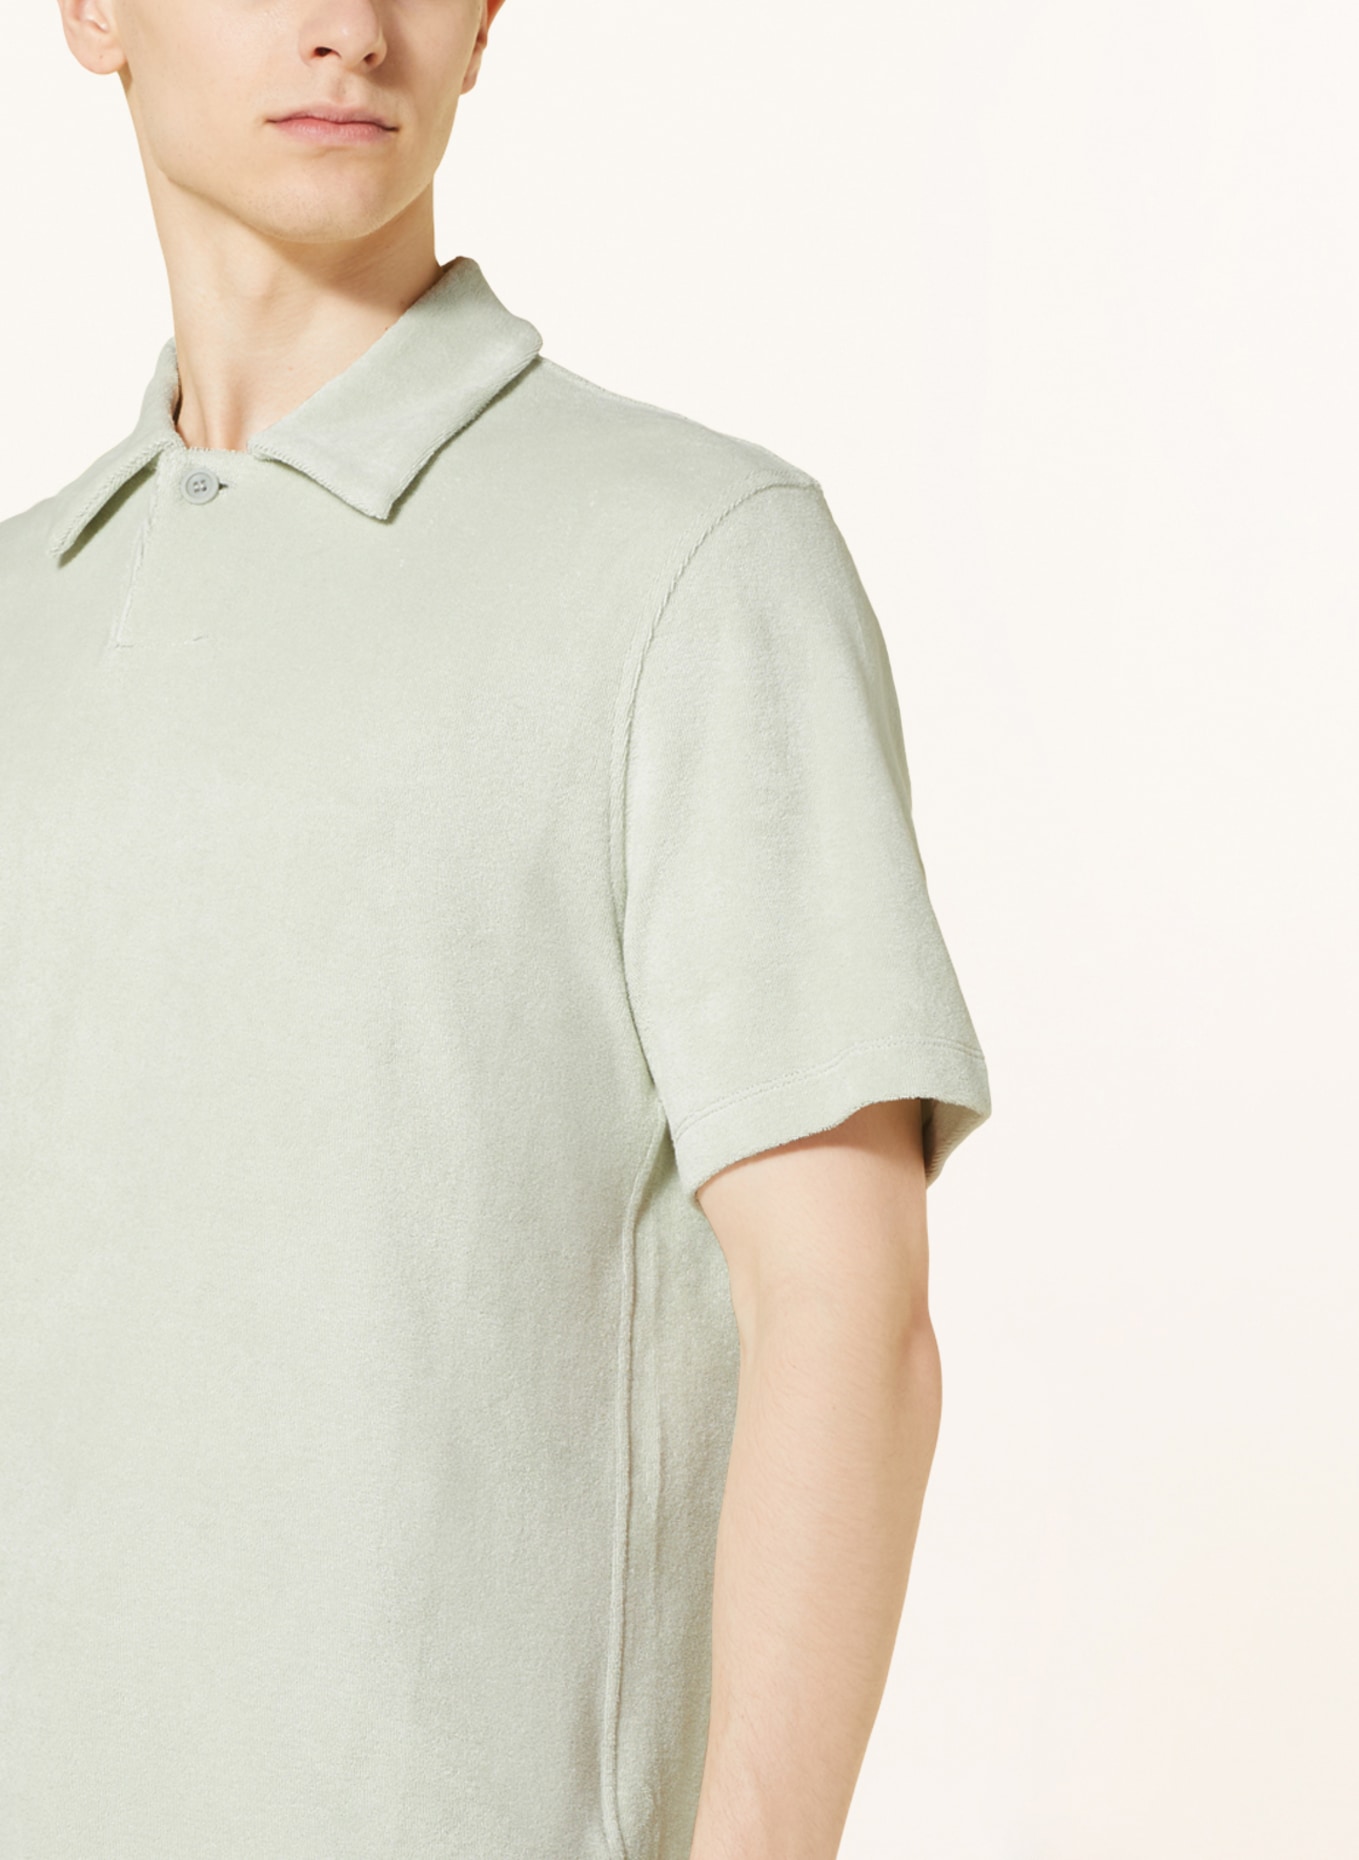 COS Terry cloth polo shirt regular fit, Color: MINT (Image 4)